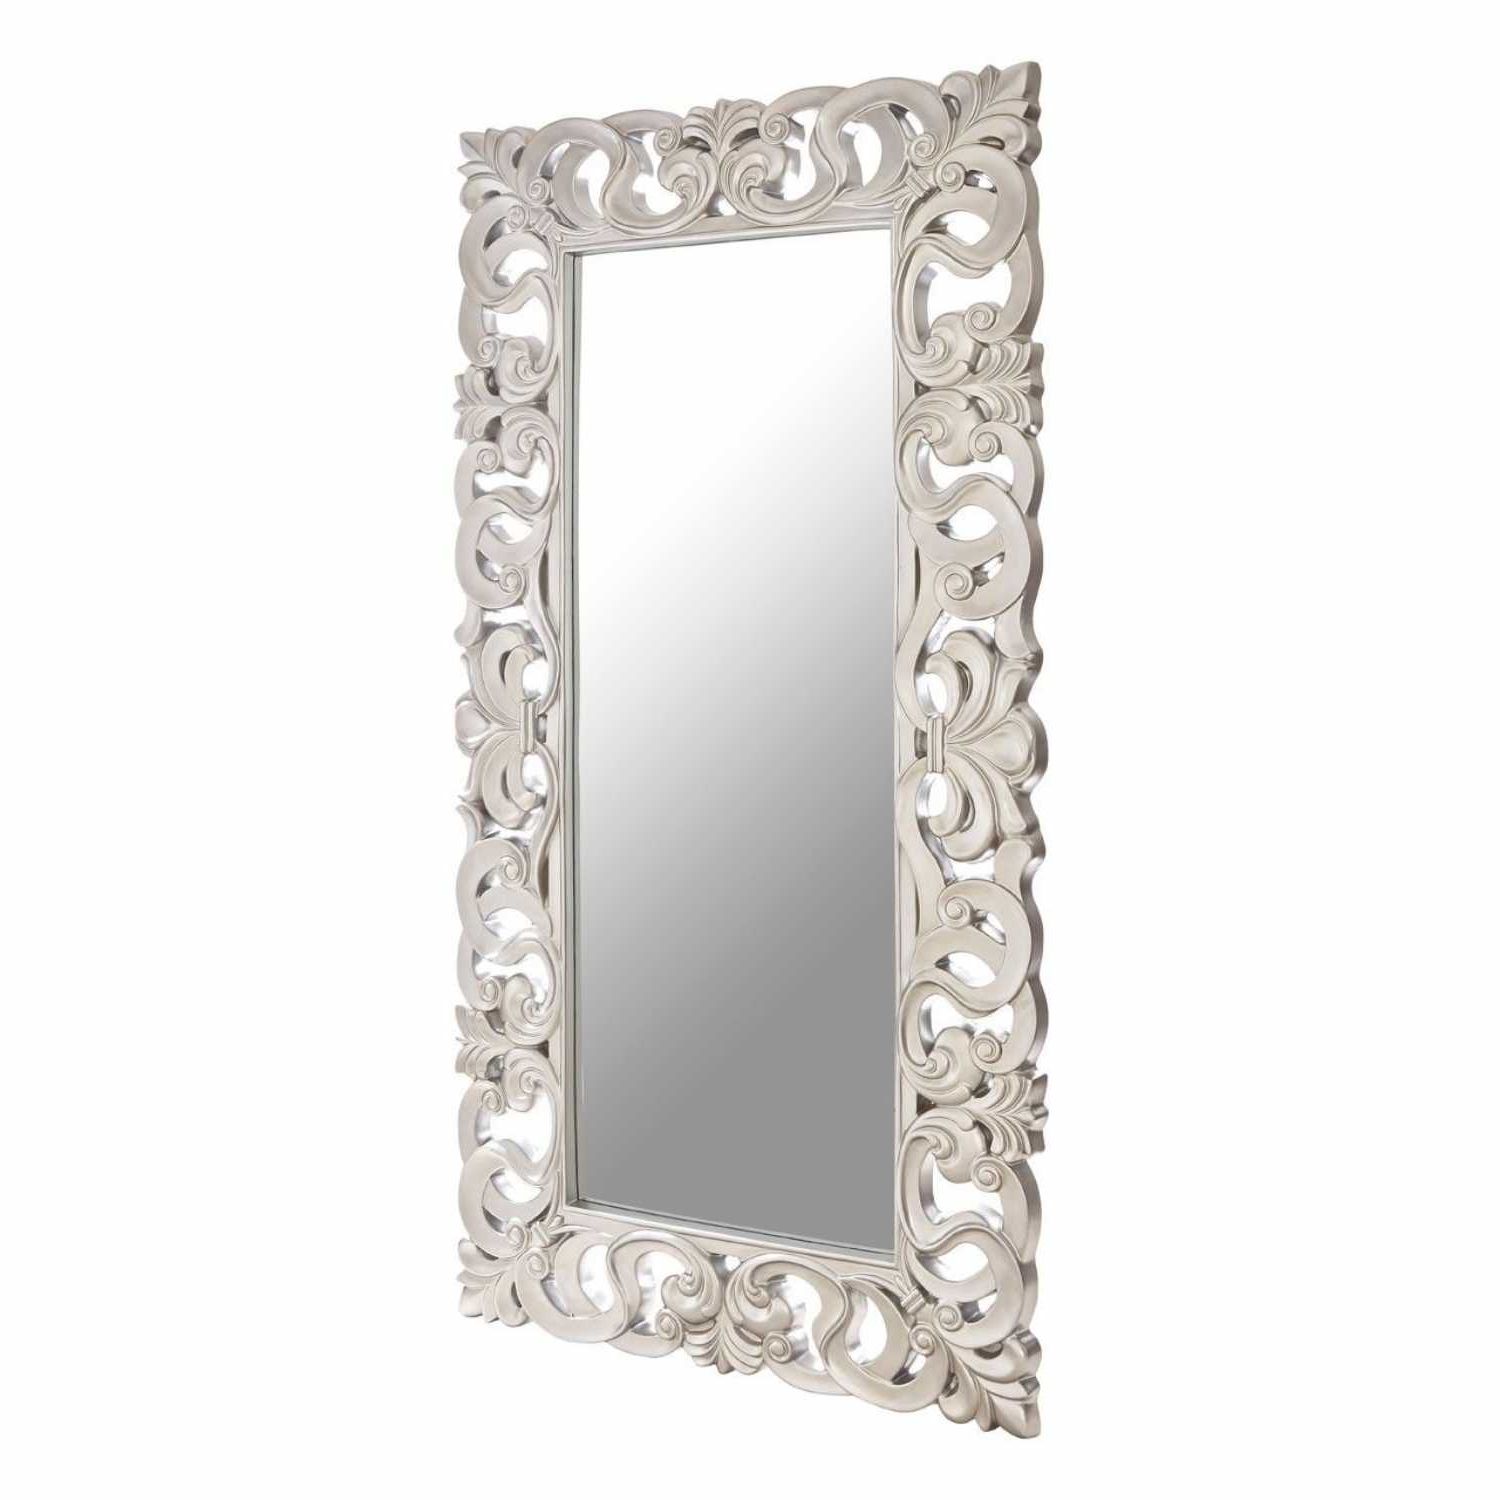 Most Recent Decorative Rectangular Wall Mirrors In Large Modern Silver Finish Ornate Rectangular Decorative Wall Mirror (View 4 of 20)